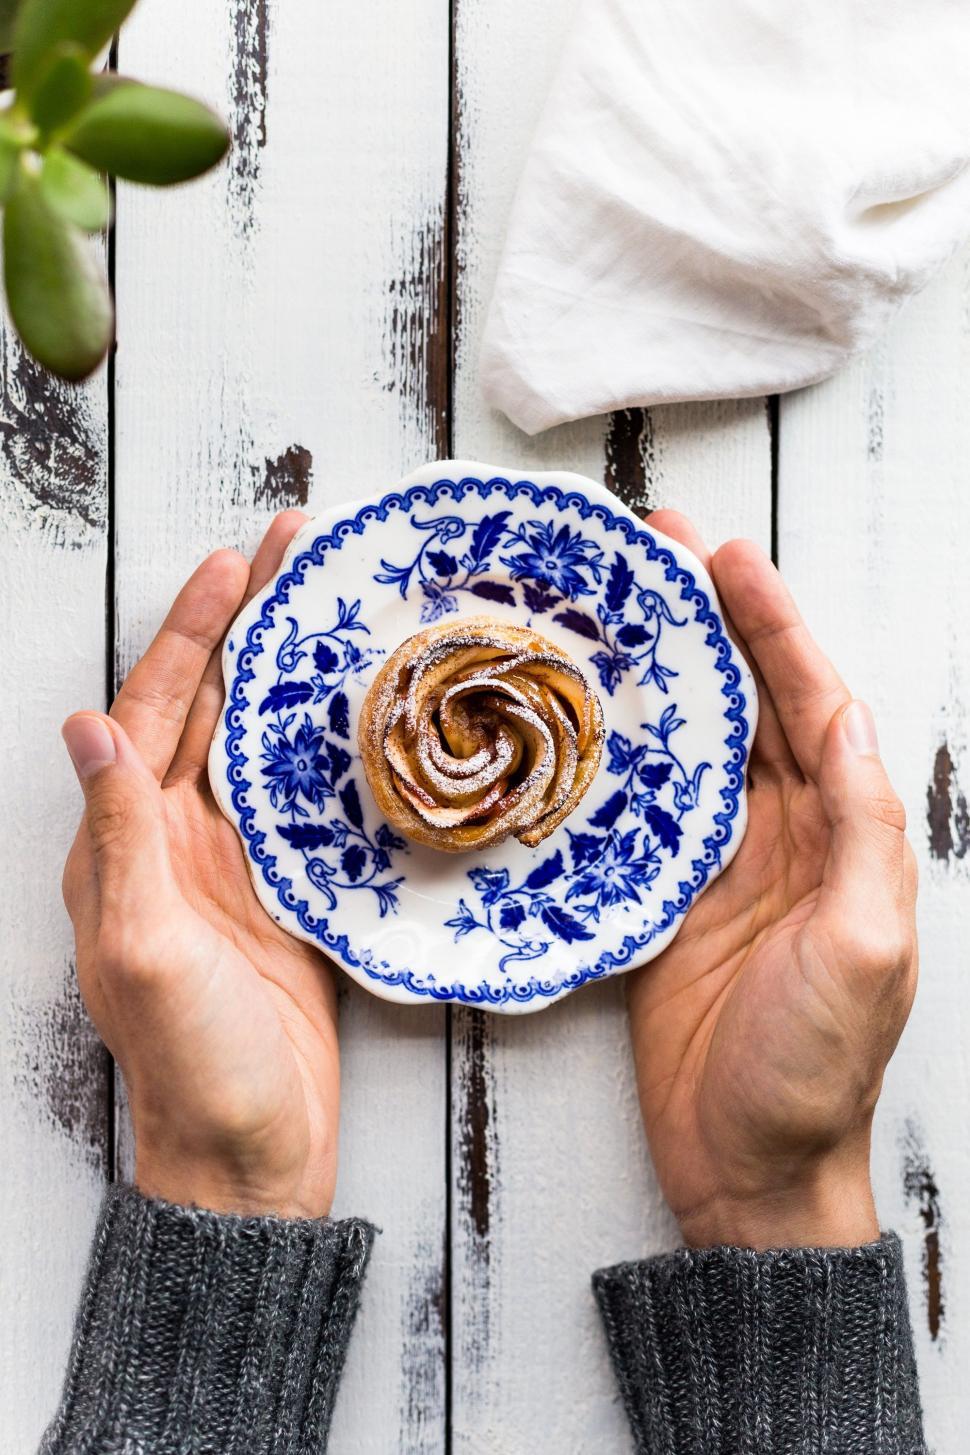 Free Image of Person Holding a Plate With a Cinnamon Roll 